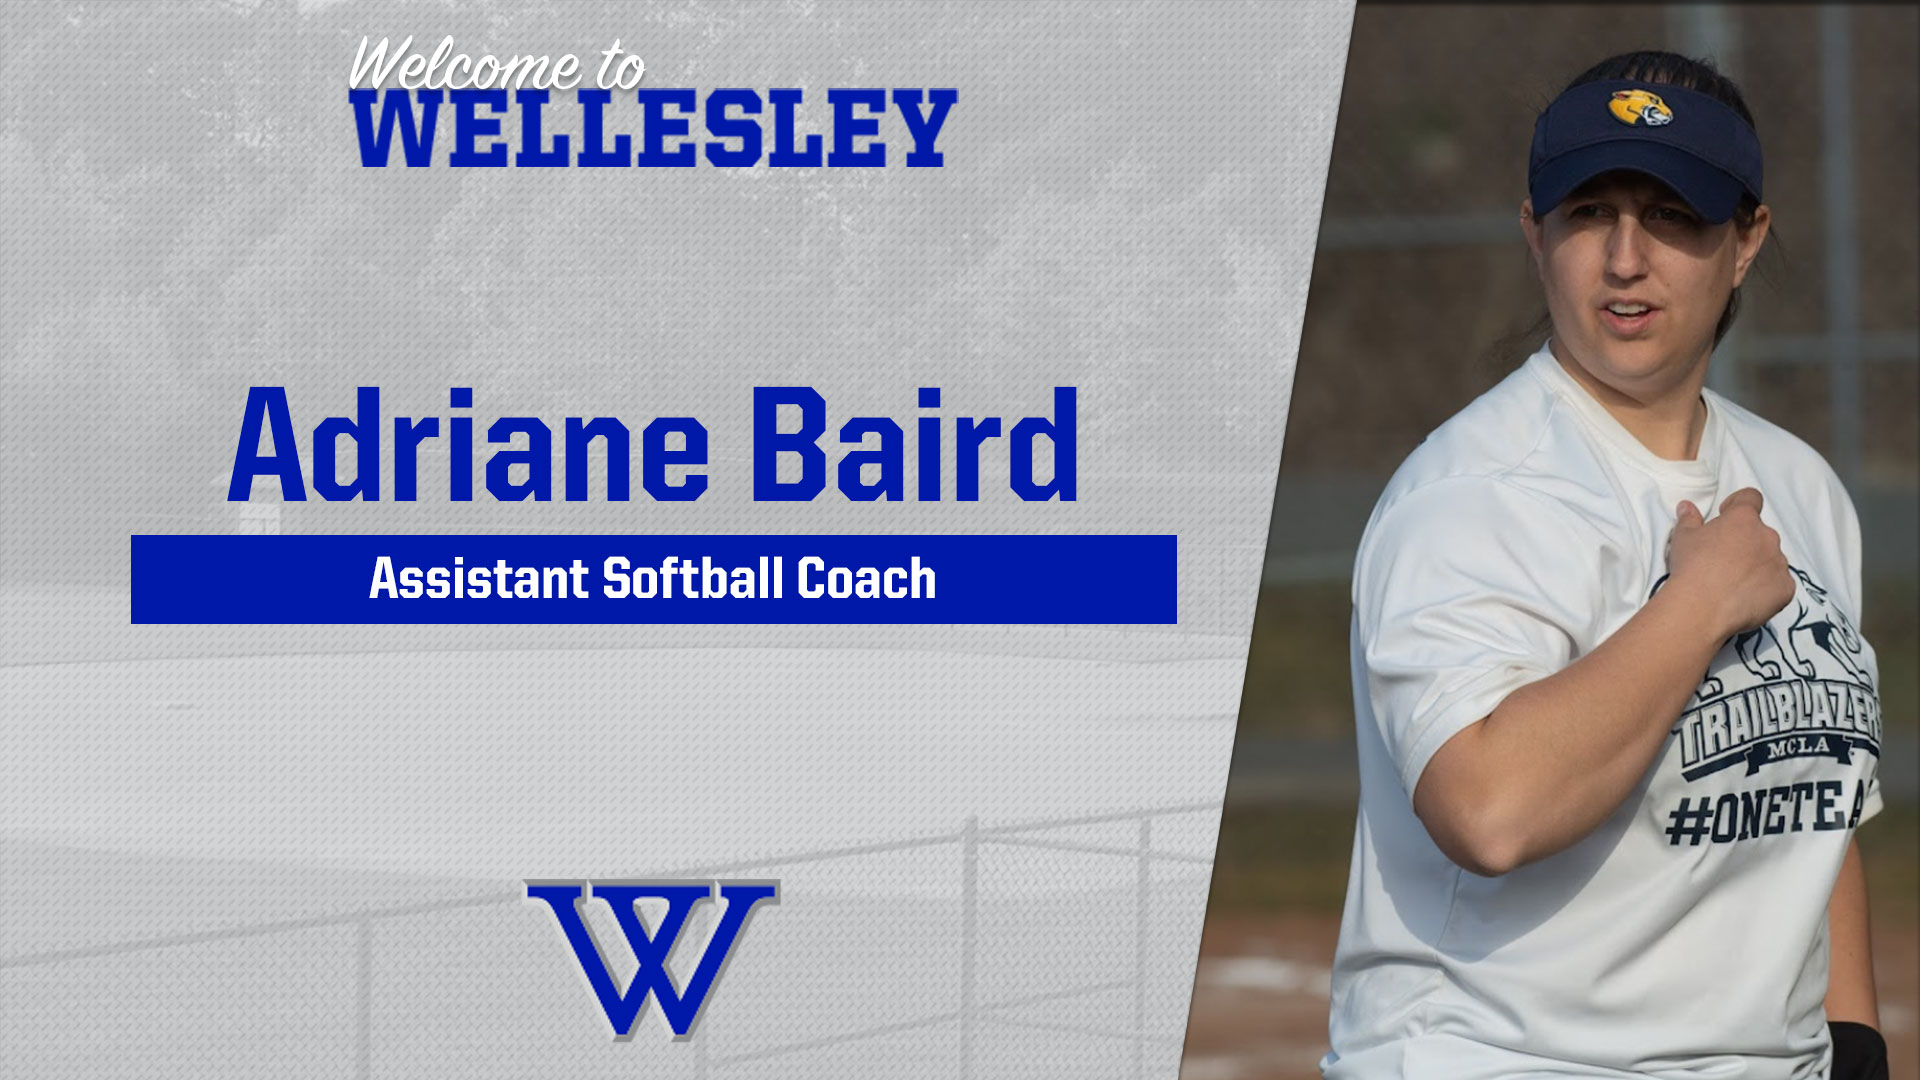 Adriane Baird joins Wellesley College as an Assistant Softball Coach